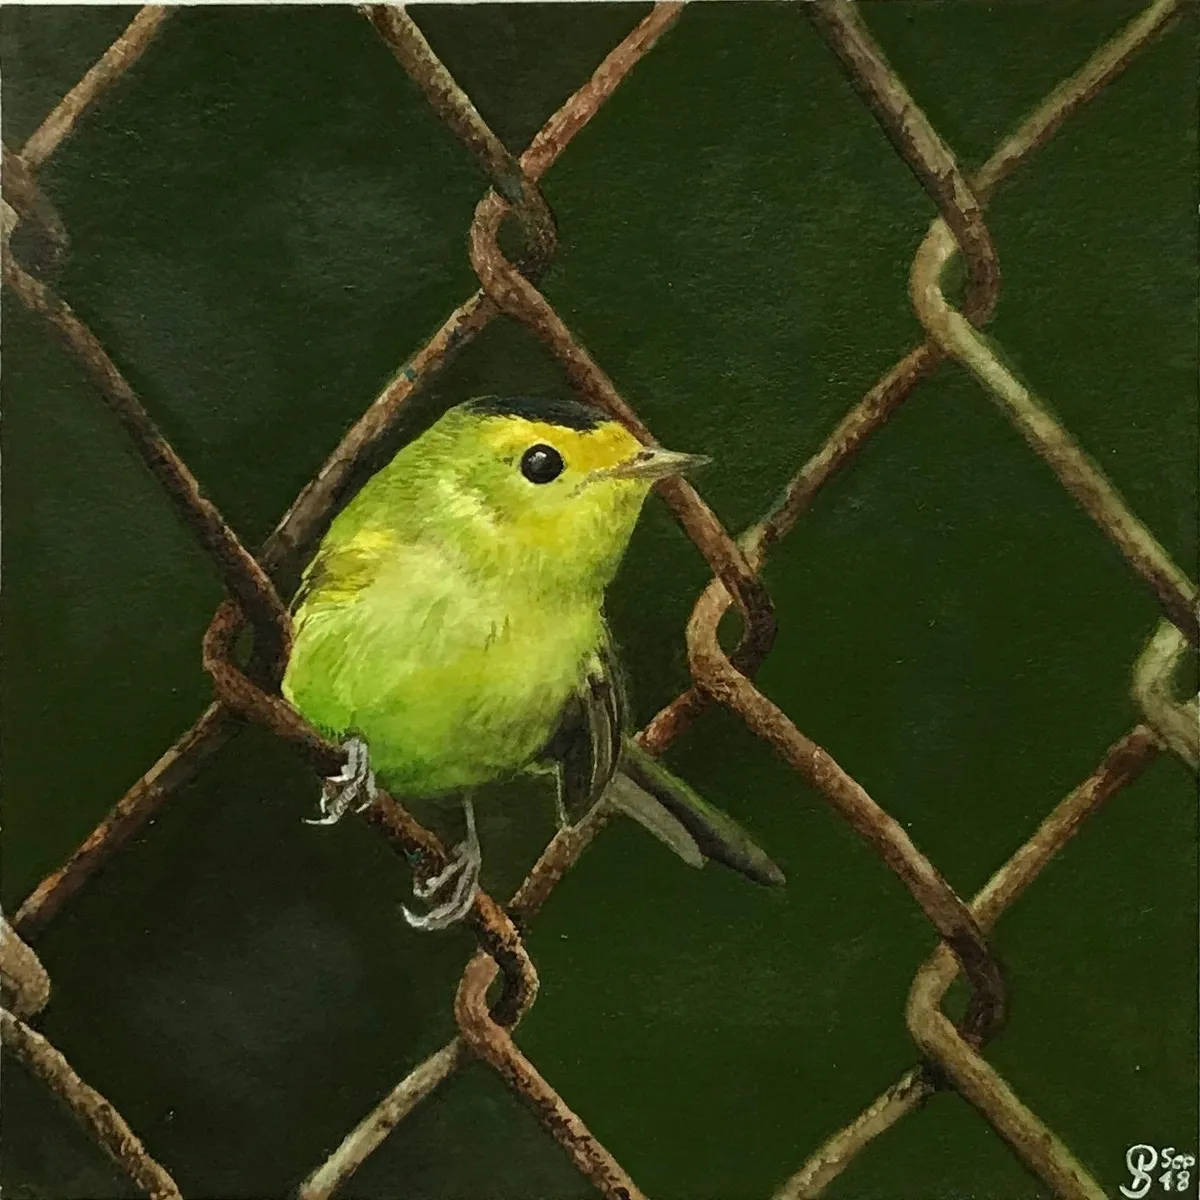 One of the finalists in the competition. Bird on fence - 'Wilson's Warbler' by Paula Schramm